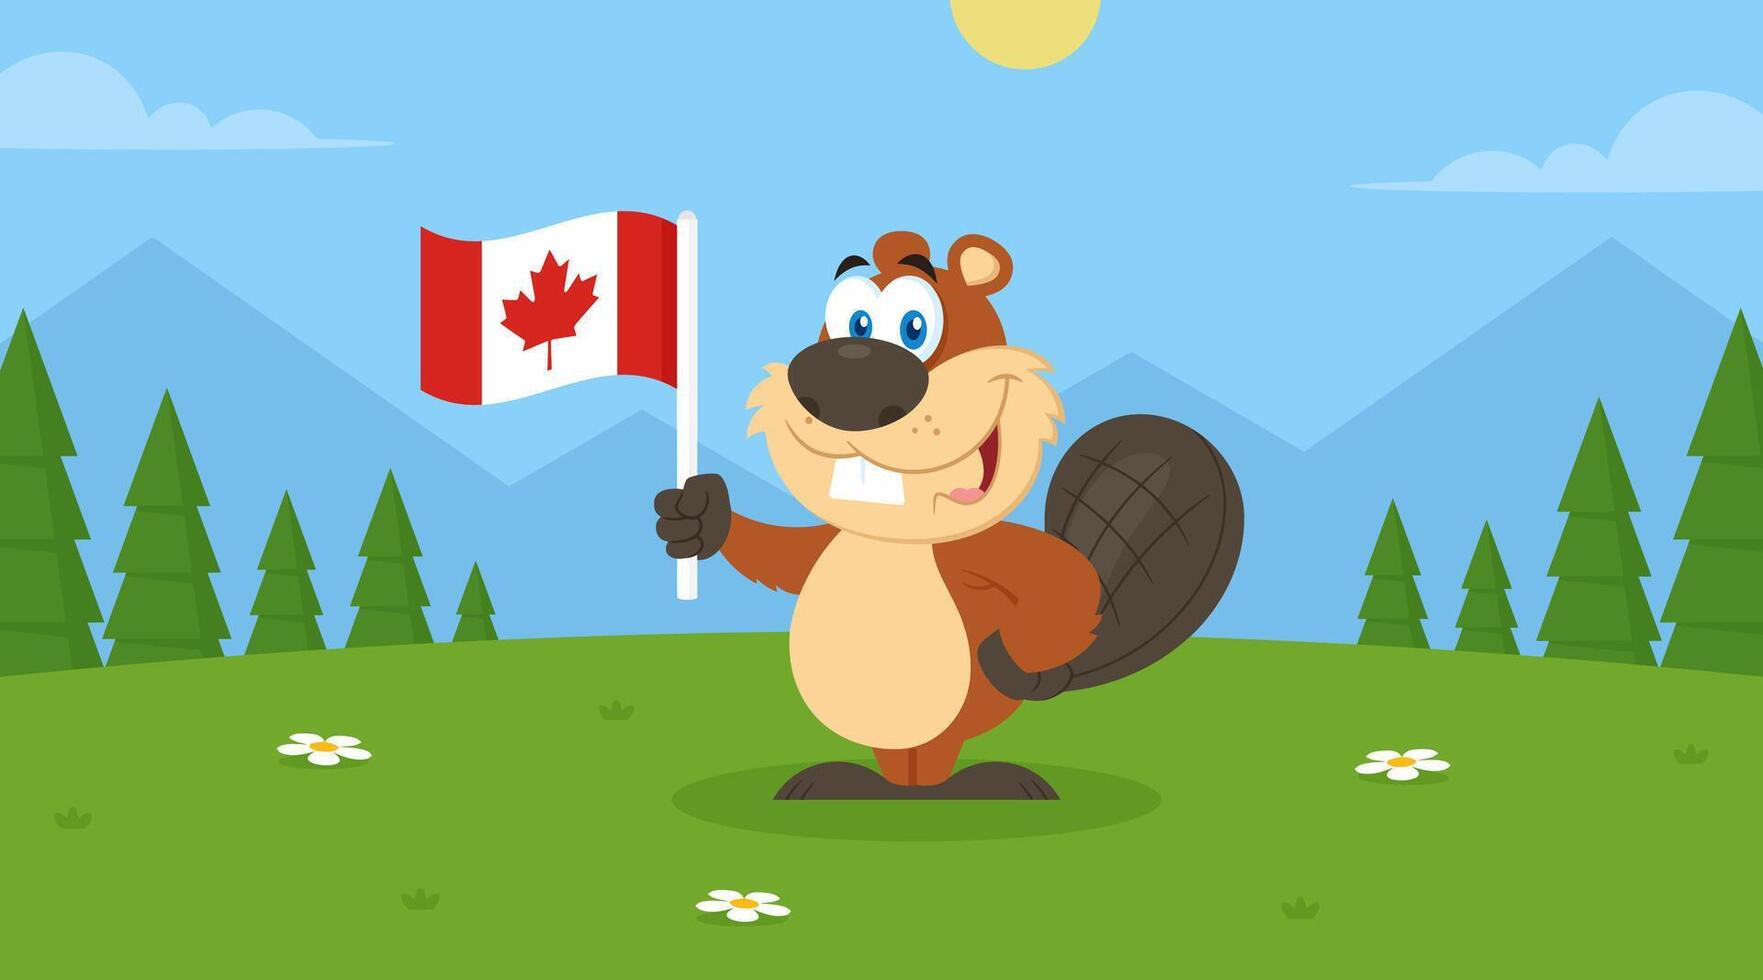 Cute Beaver Cartoon Mascot Character Holding A Canadian Flag. Vector Flat Design Illustration With Landscape Background